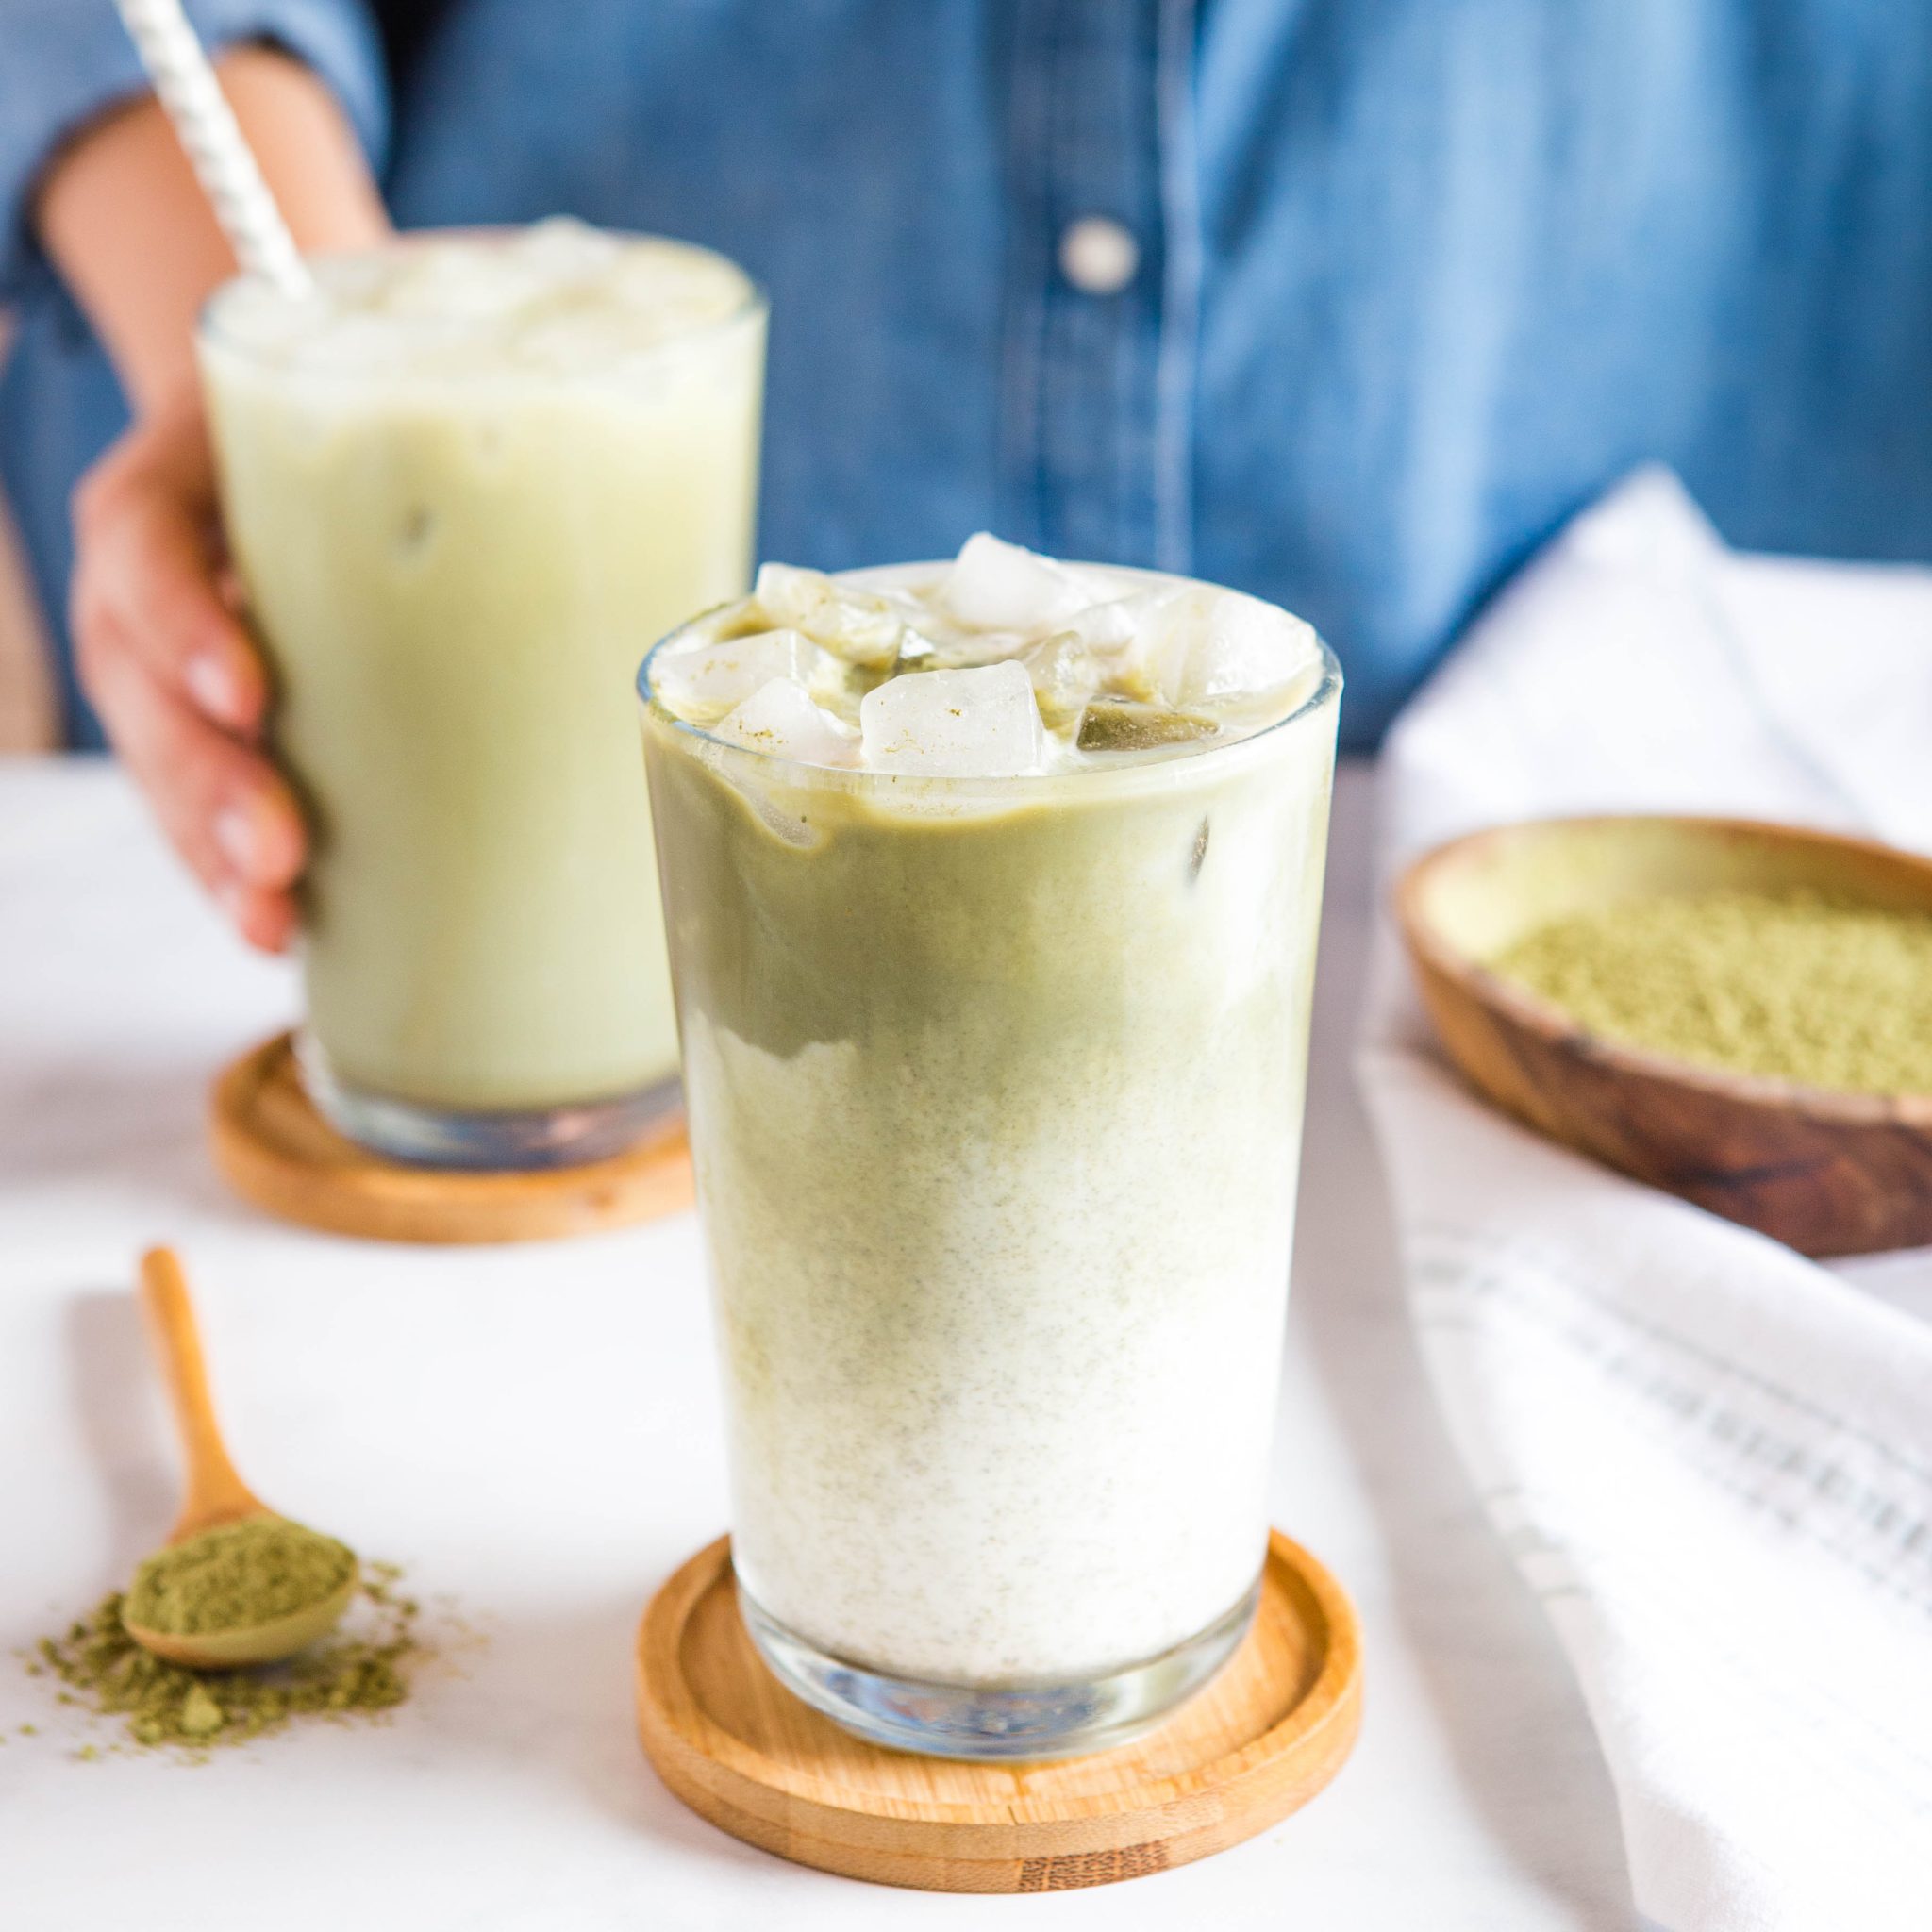 https://thebusybaker.ca/wp-content/uploads/2022/01/iced-matcha-latte-fb-ig-6-scaled.jpg